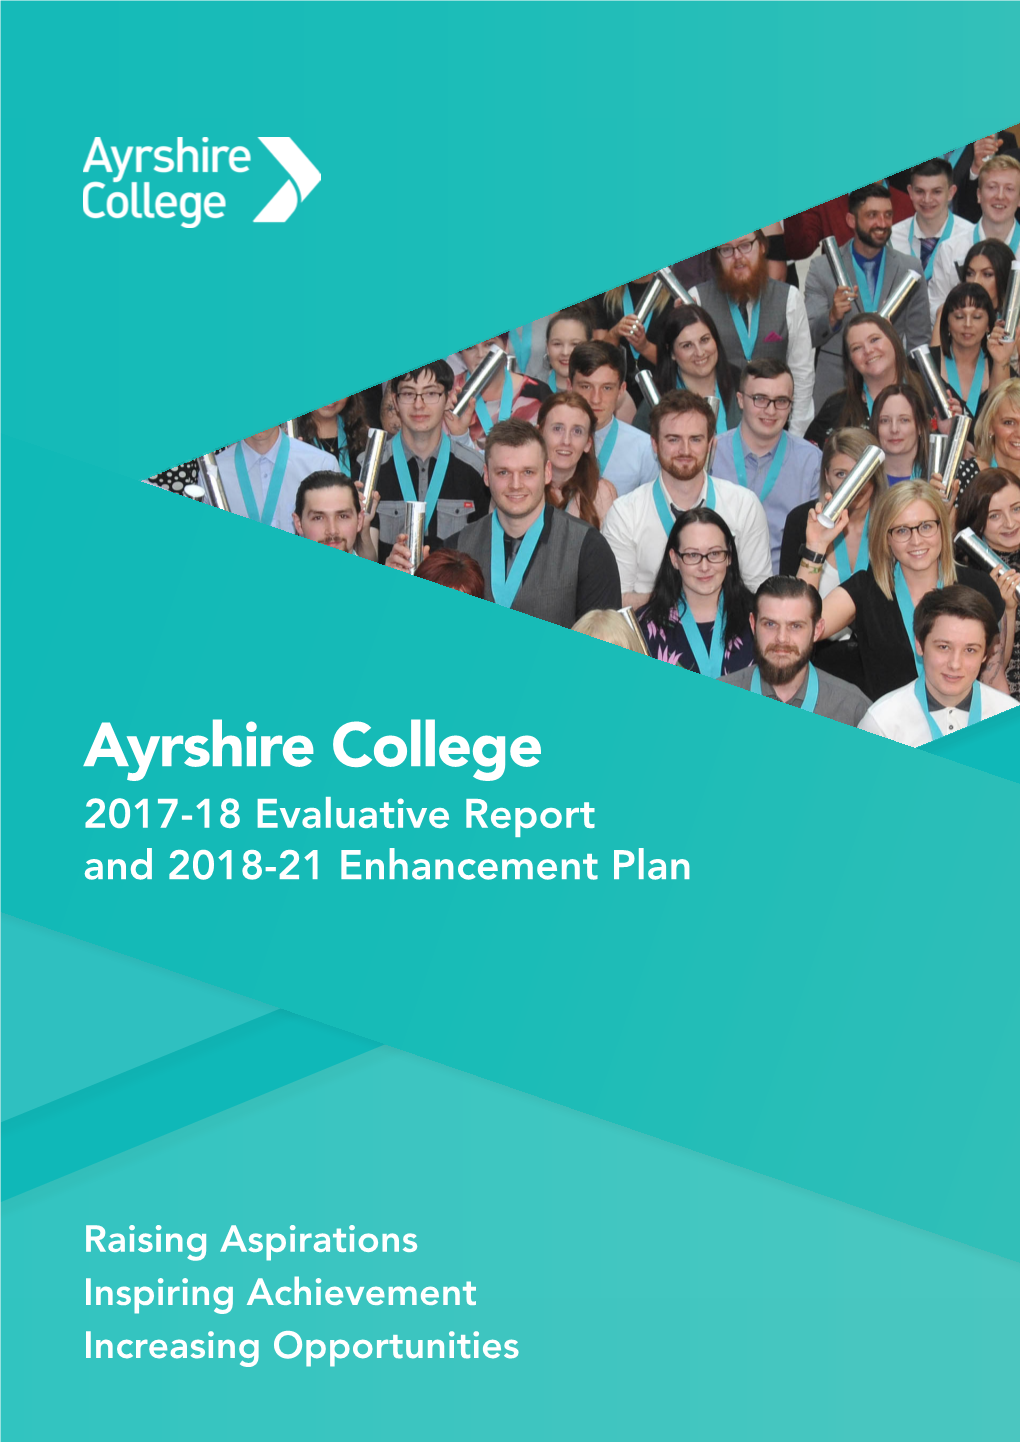 2017-18 Evaluative Report and 2018-21 Enhancement Plan